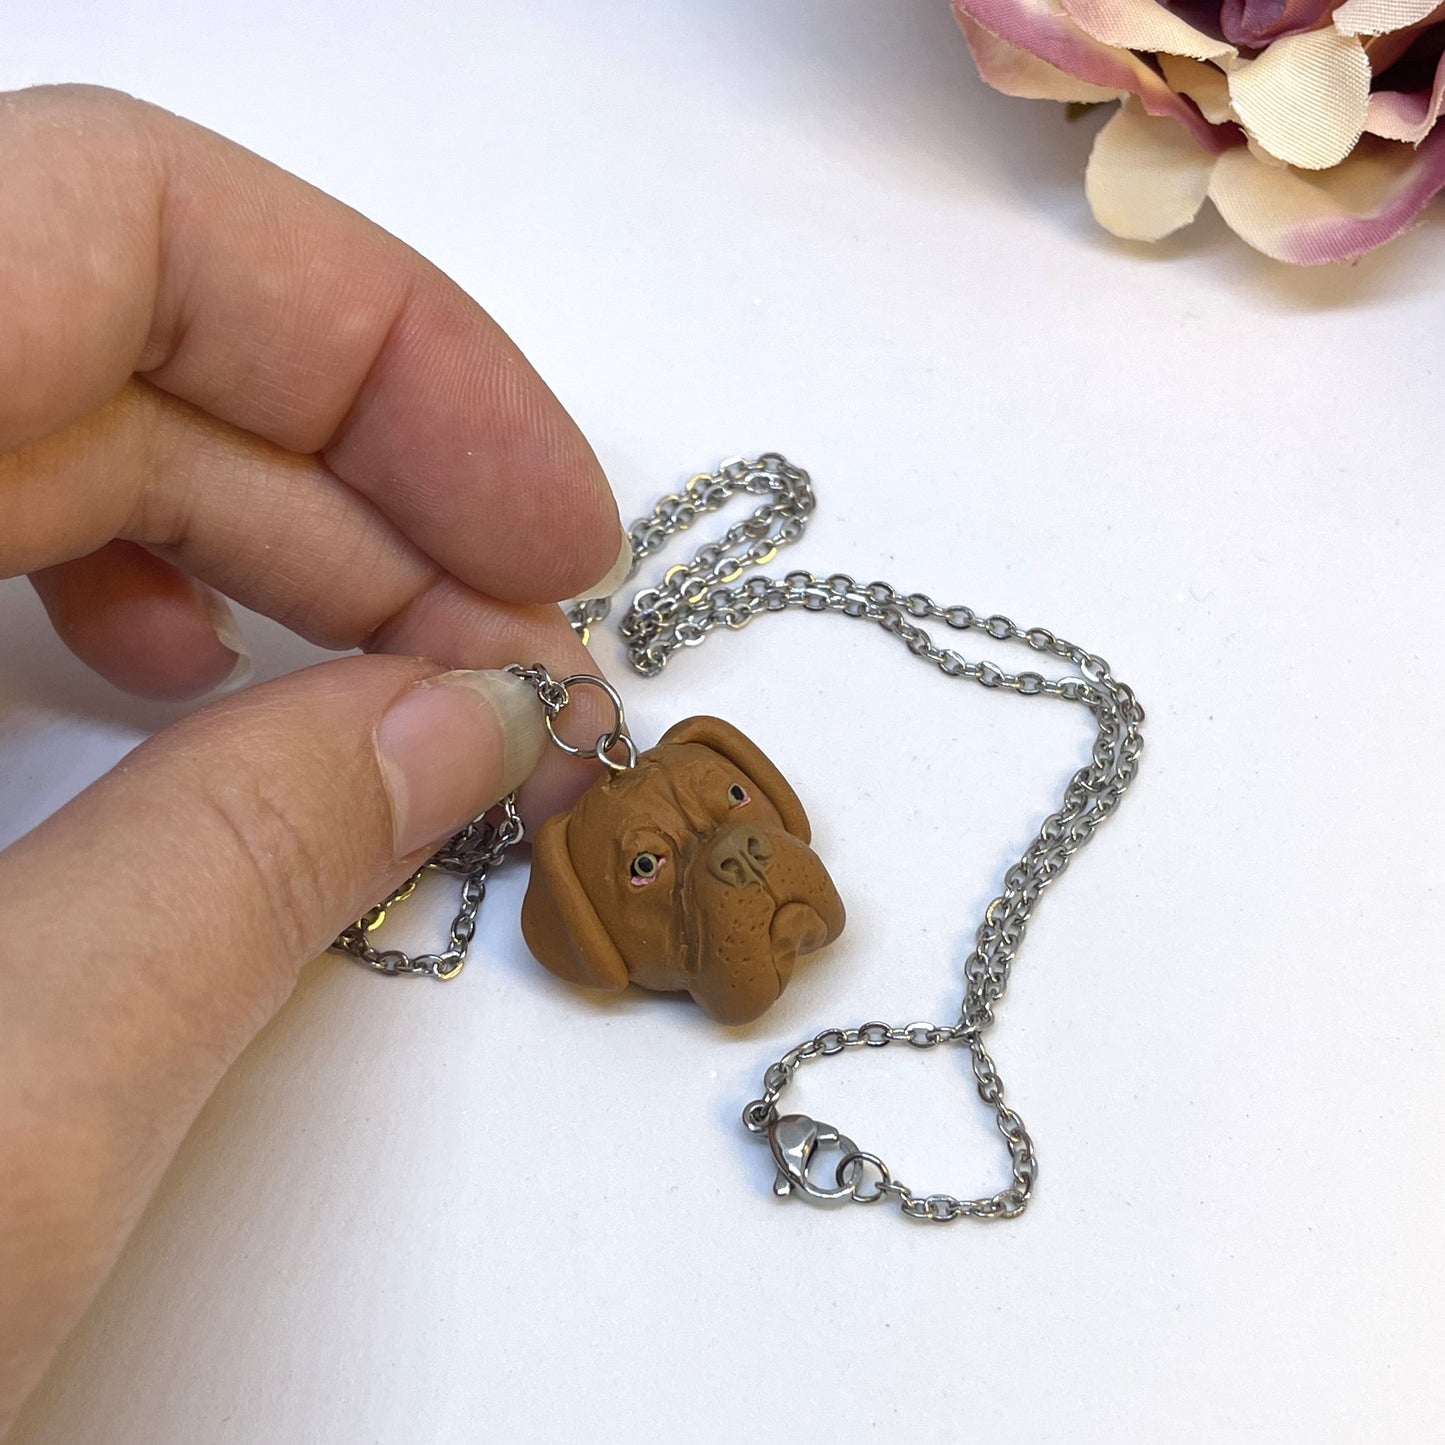 Handmade custom dogue de bordeaux face necklace pendant on chain, held in front of faux pink flower.